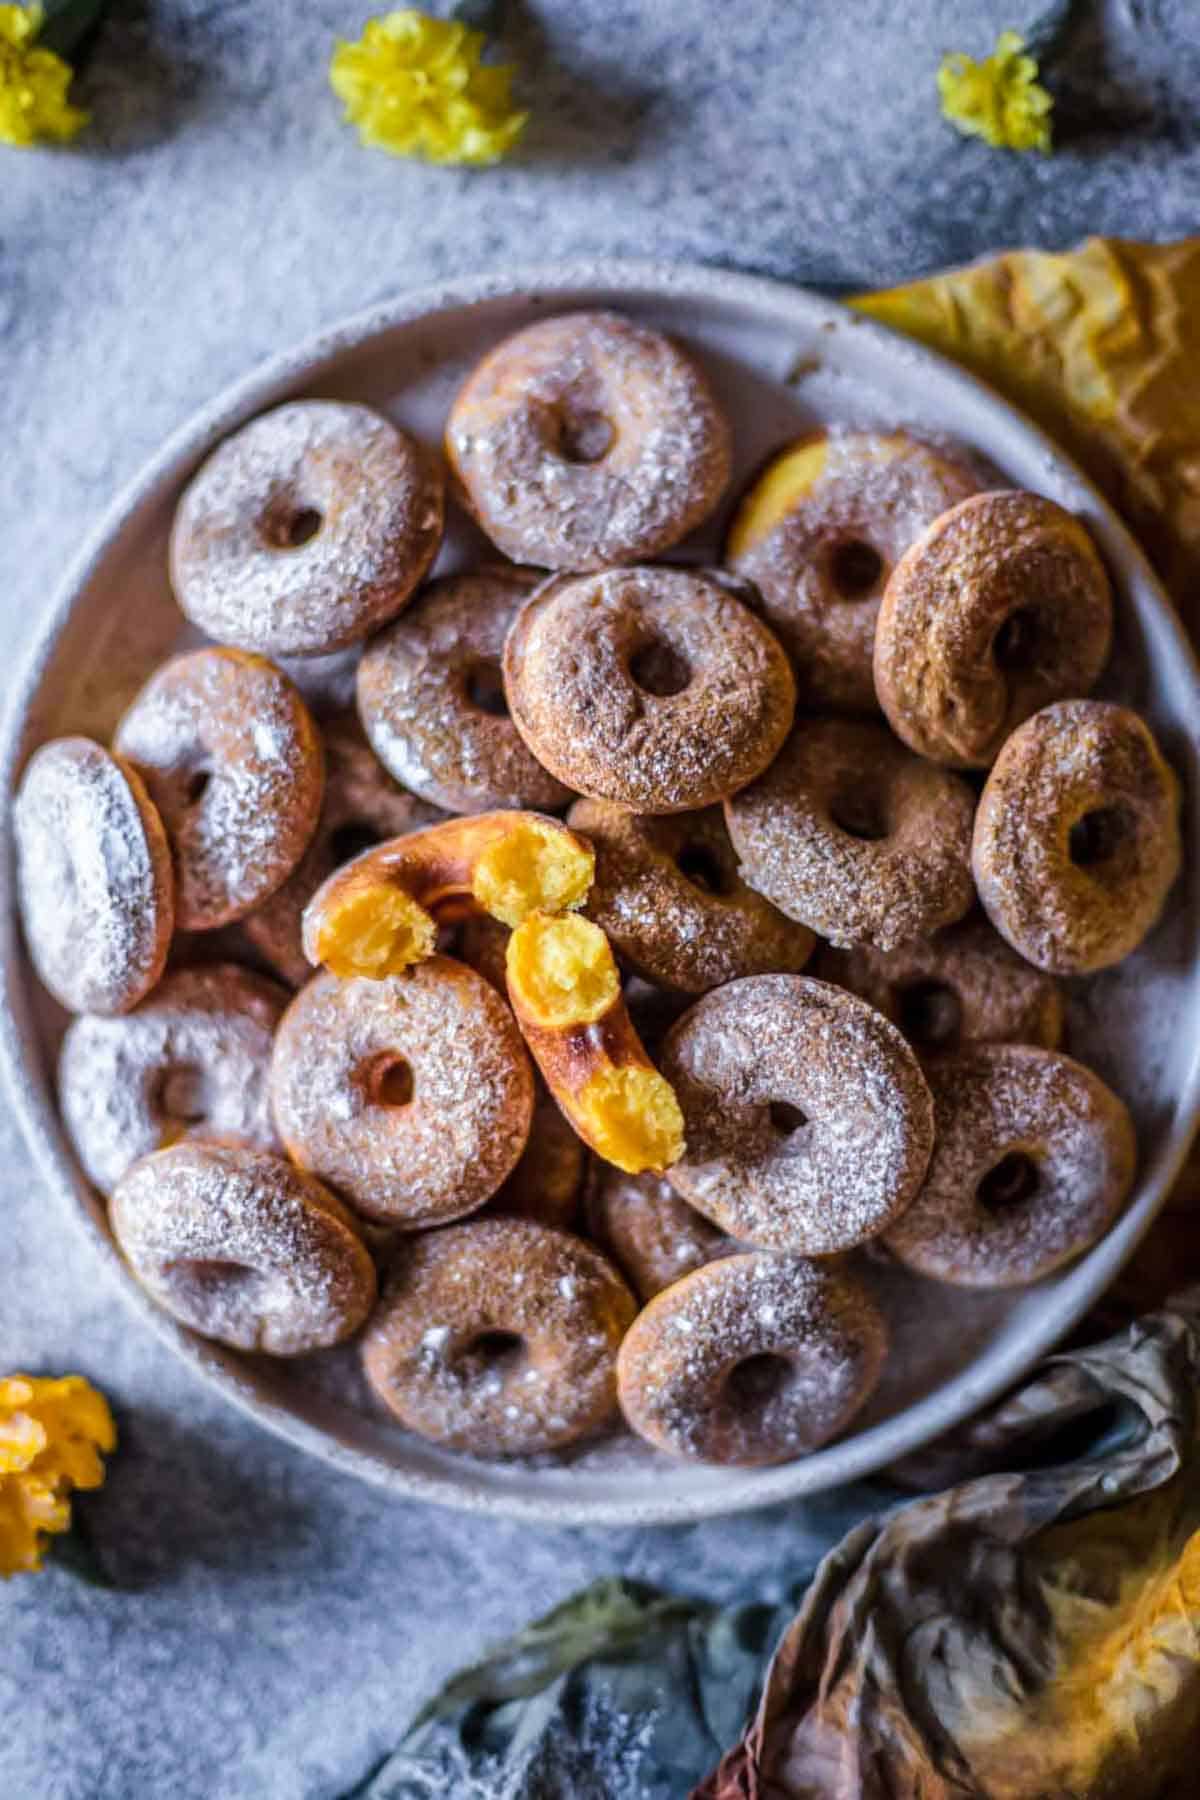 Gluten-free pumpkin donuts on a plate with one donut broken in half to show the texture.